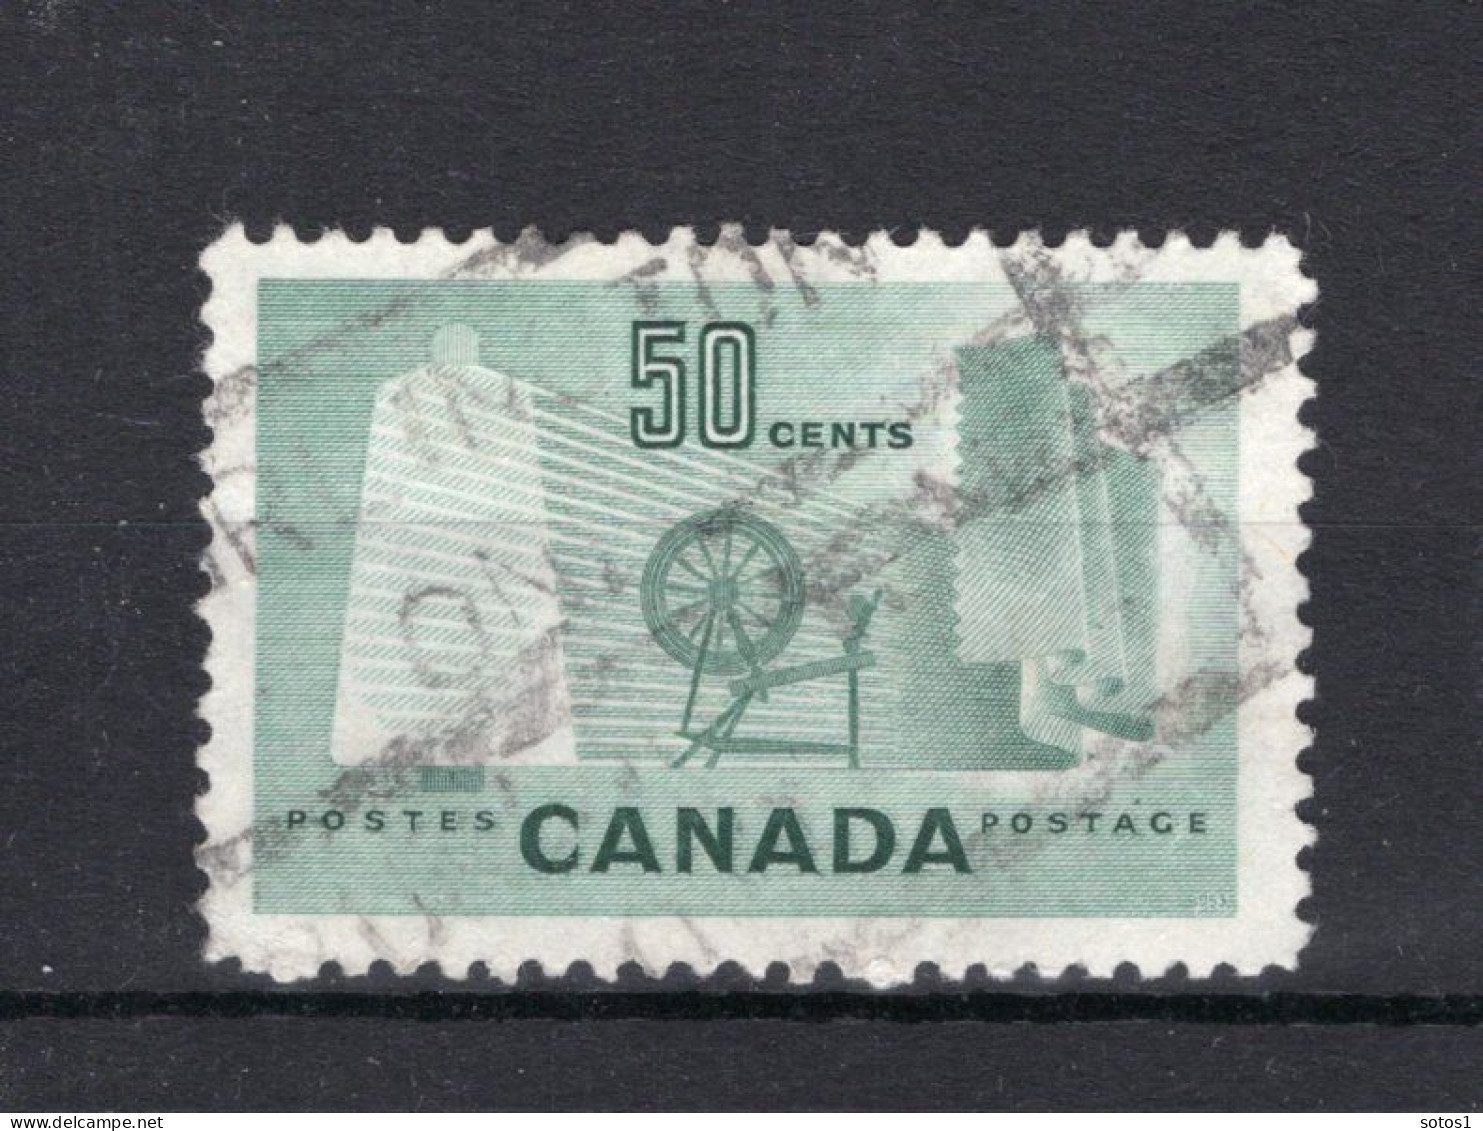 CANADA Yt. 266° Gestempeld 1953 - Used Stamps